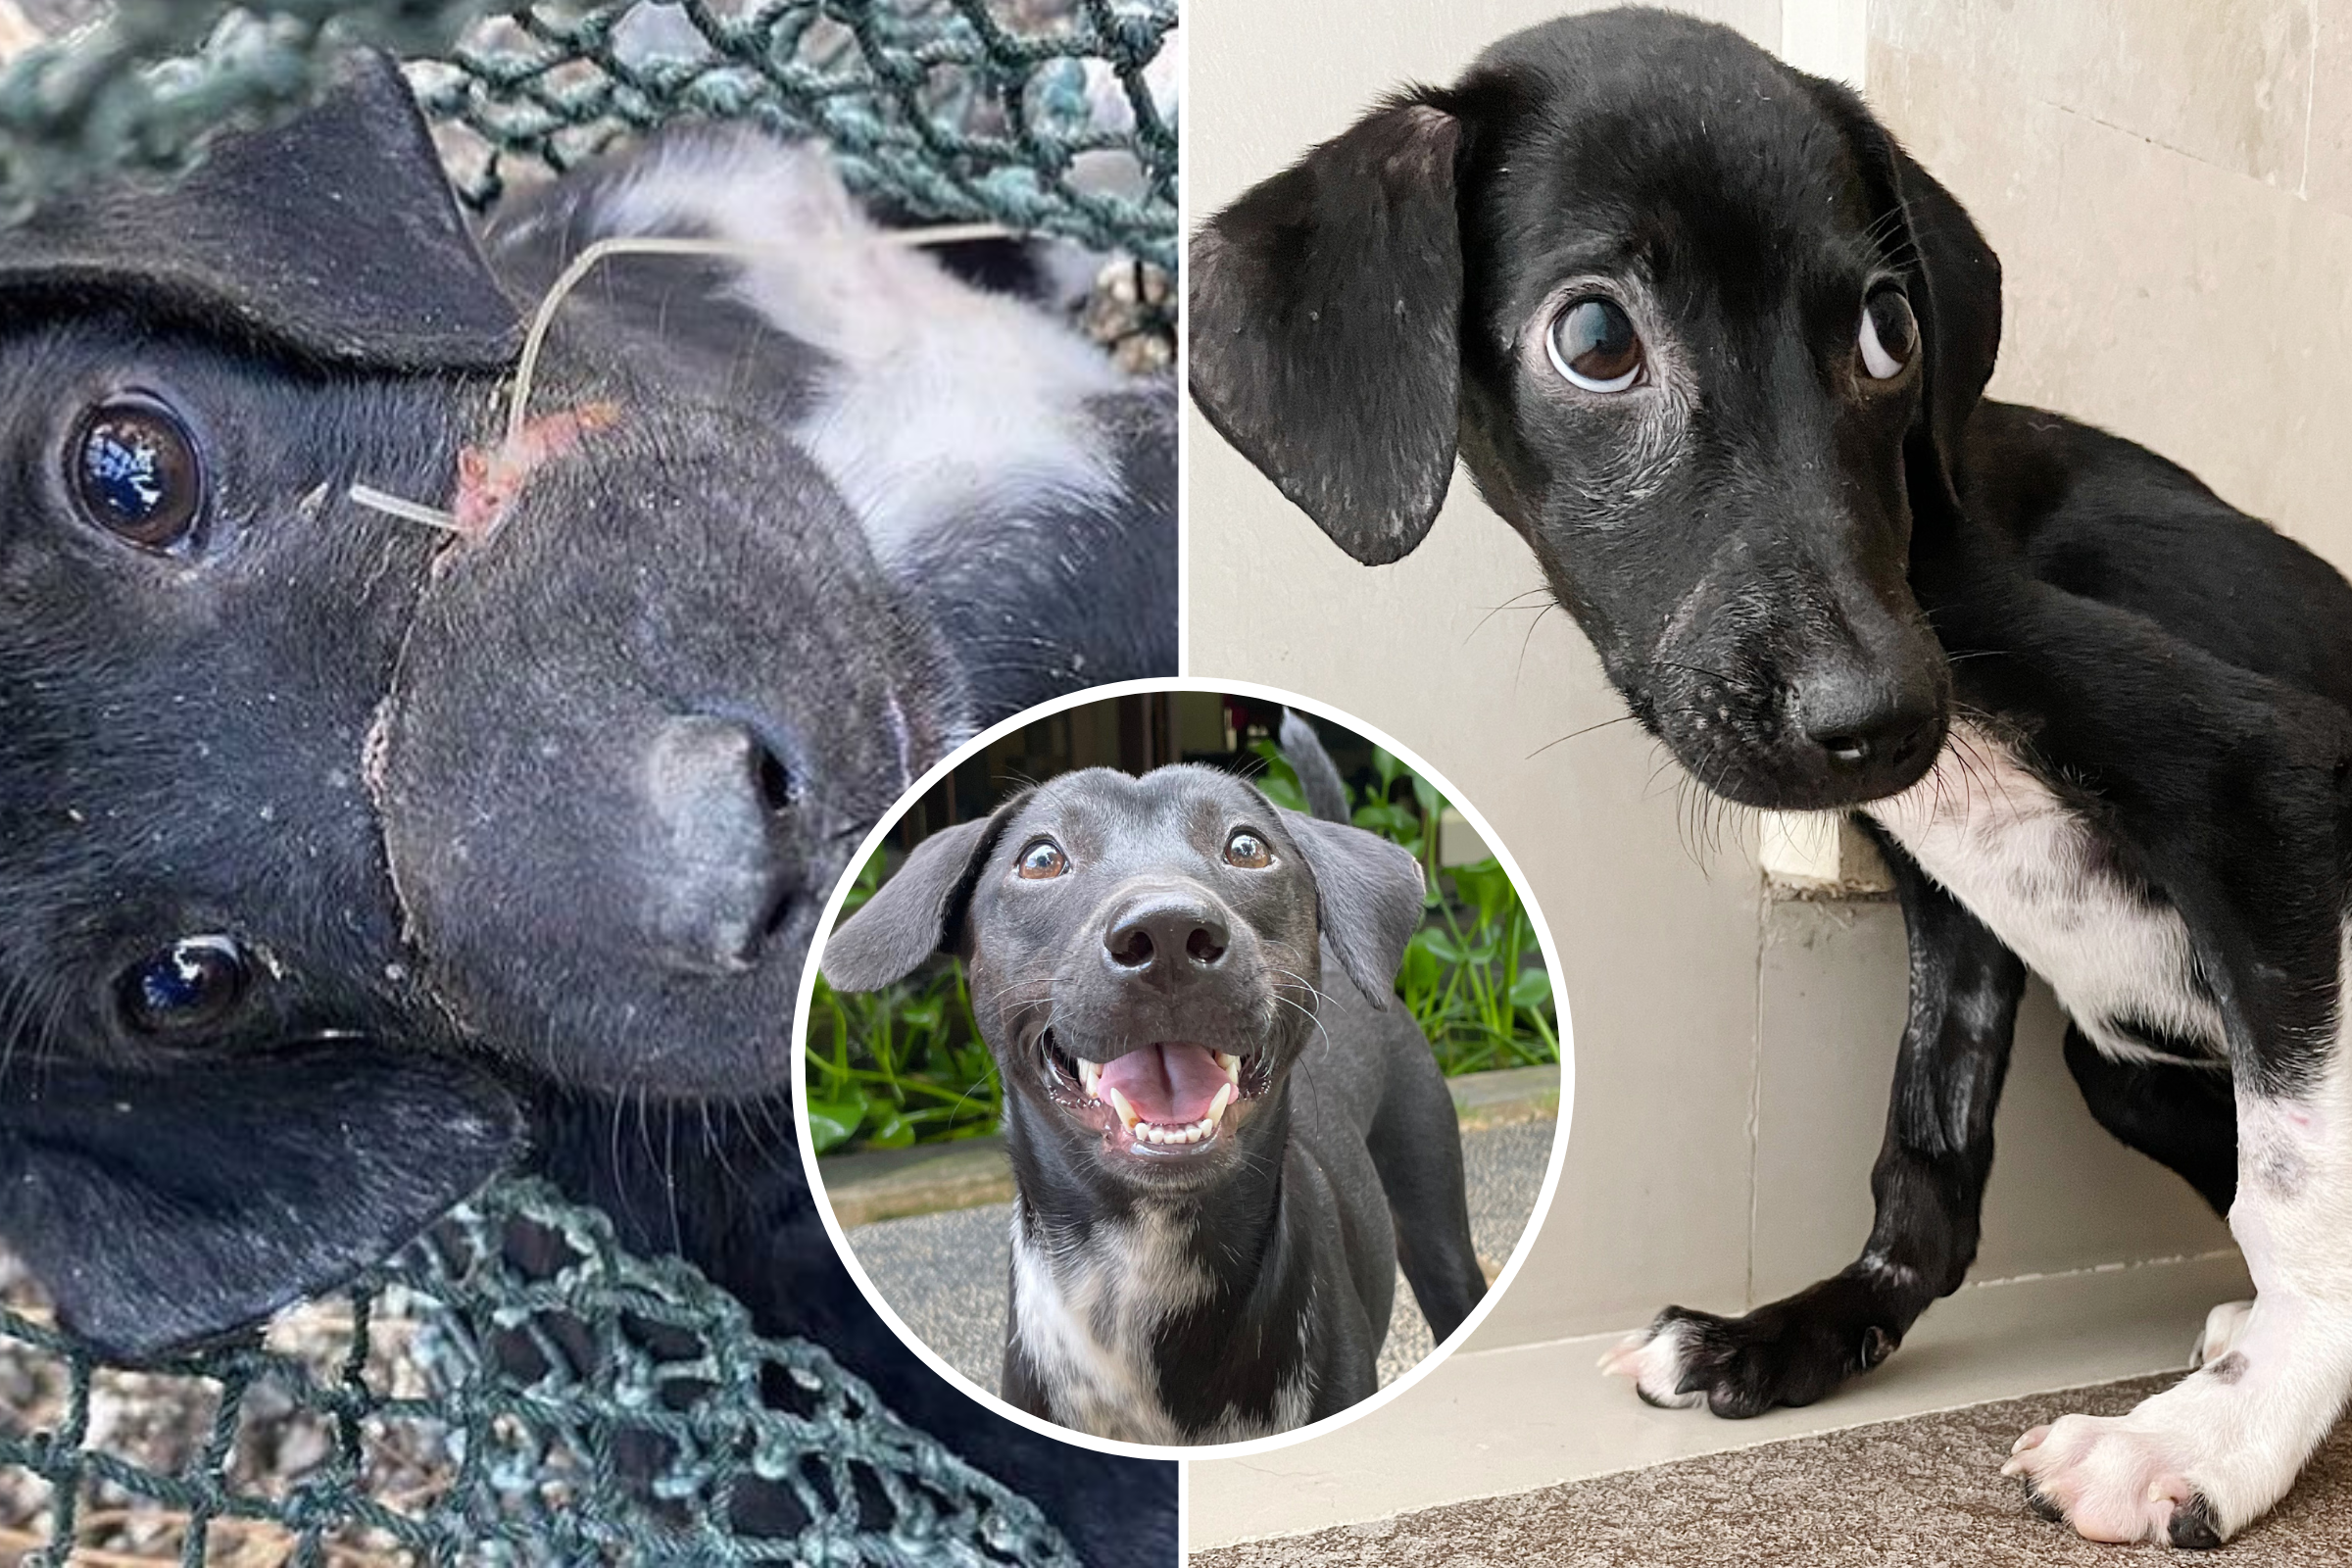 Dog Unrecognizable After Rescue From the Meat Trade: ‘Made It Through’